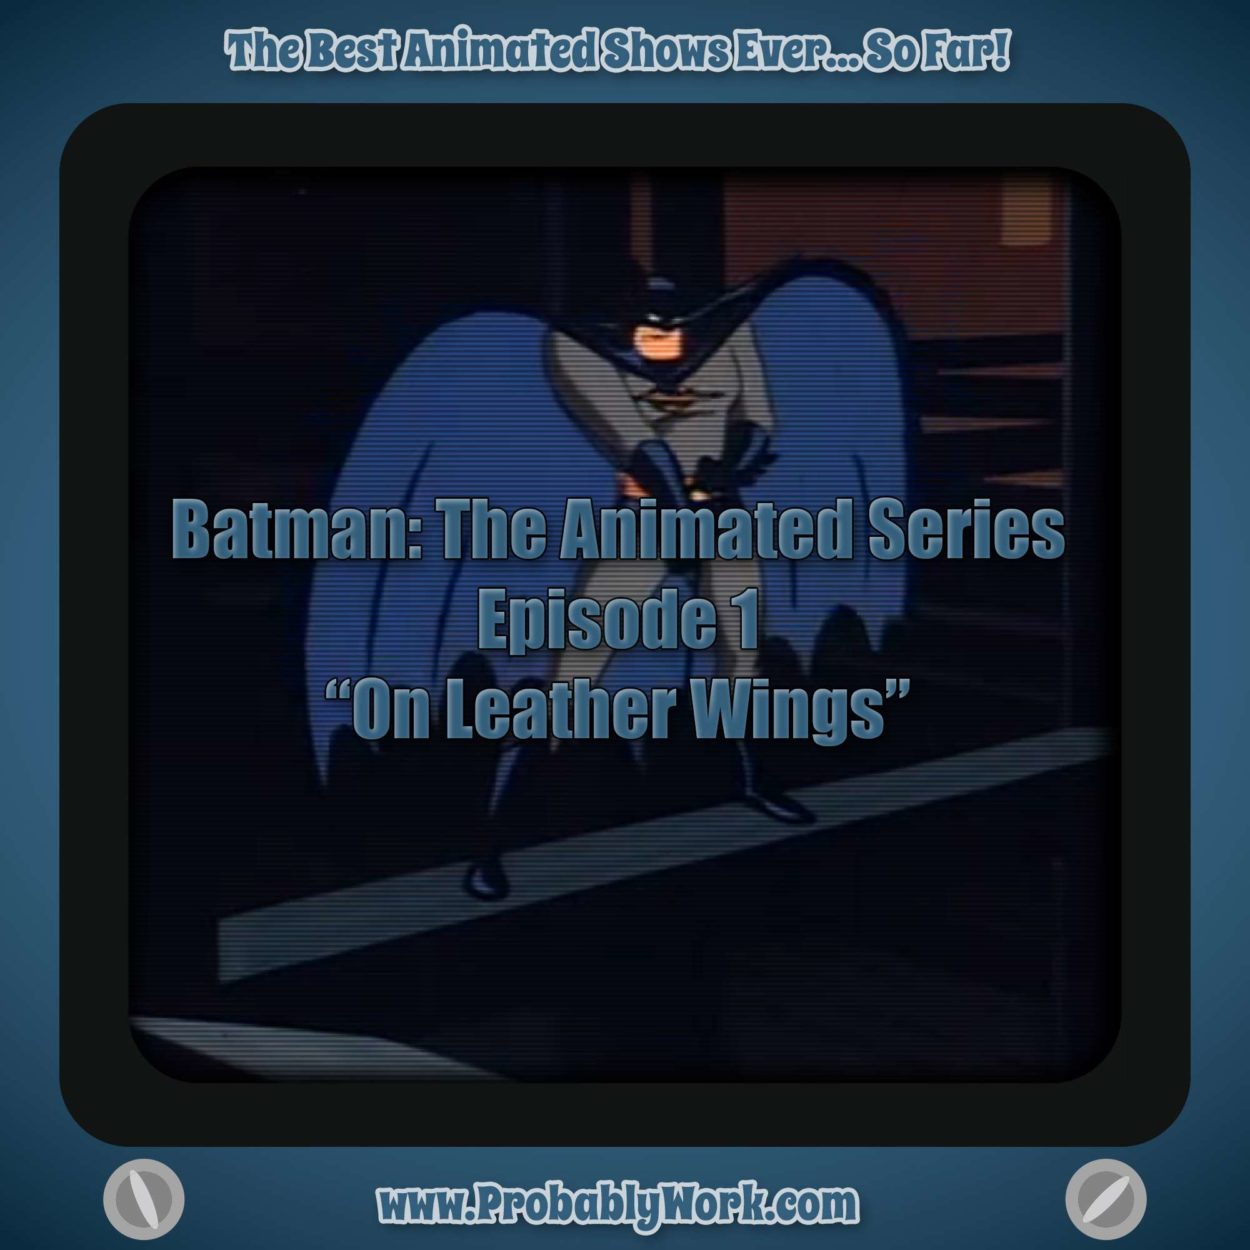 Batman: The Animated Series S01E01 - The Best Animated Shows Ever... So Far!